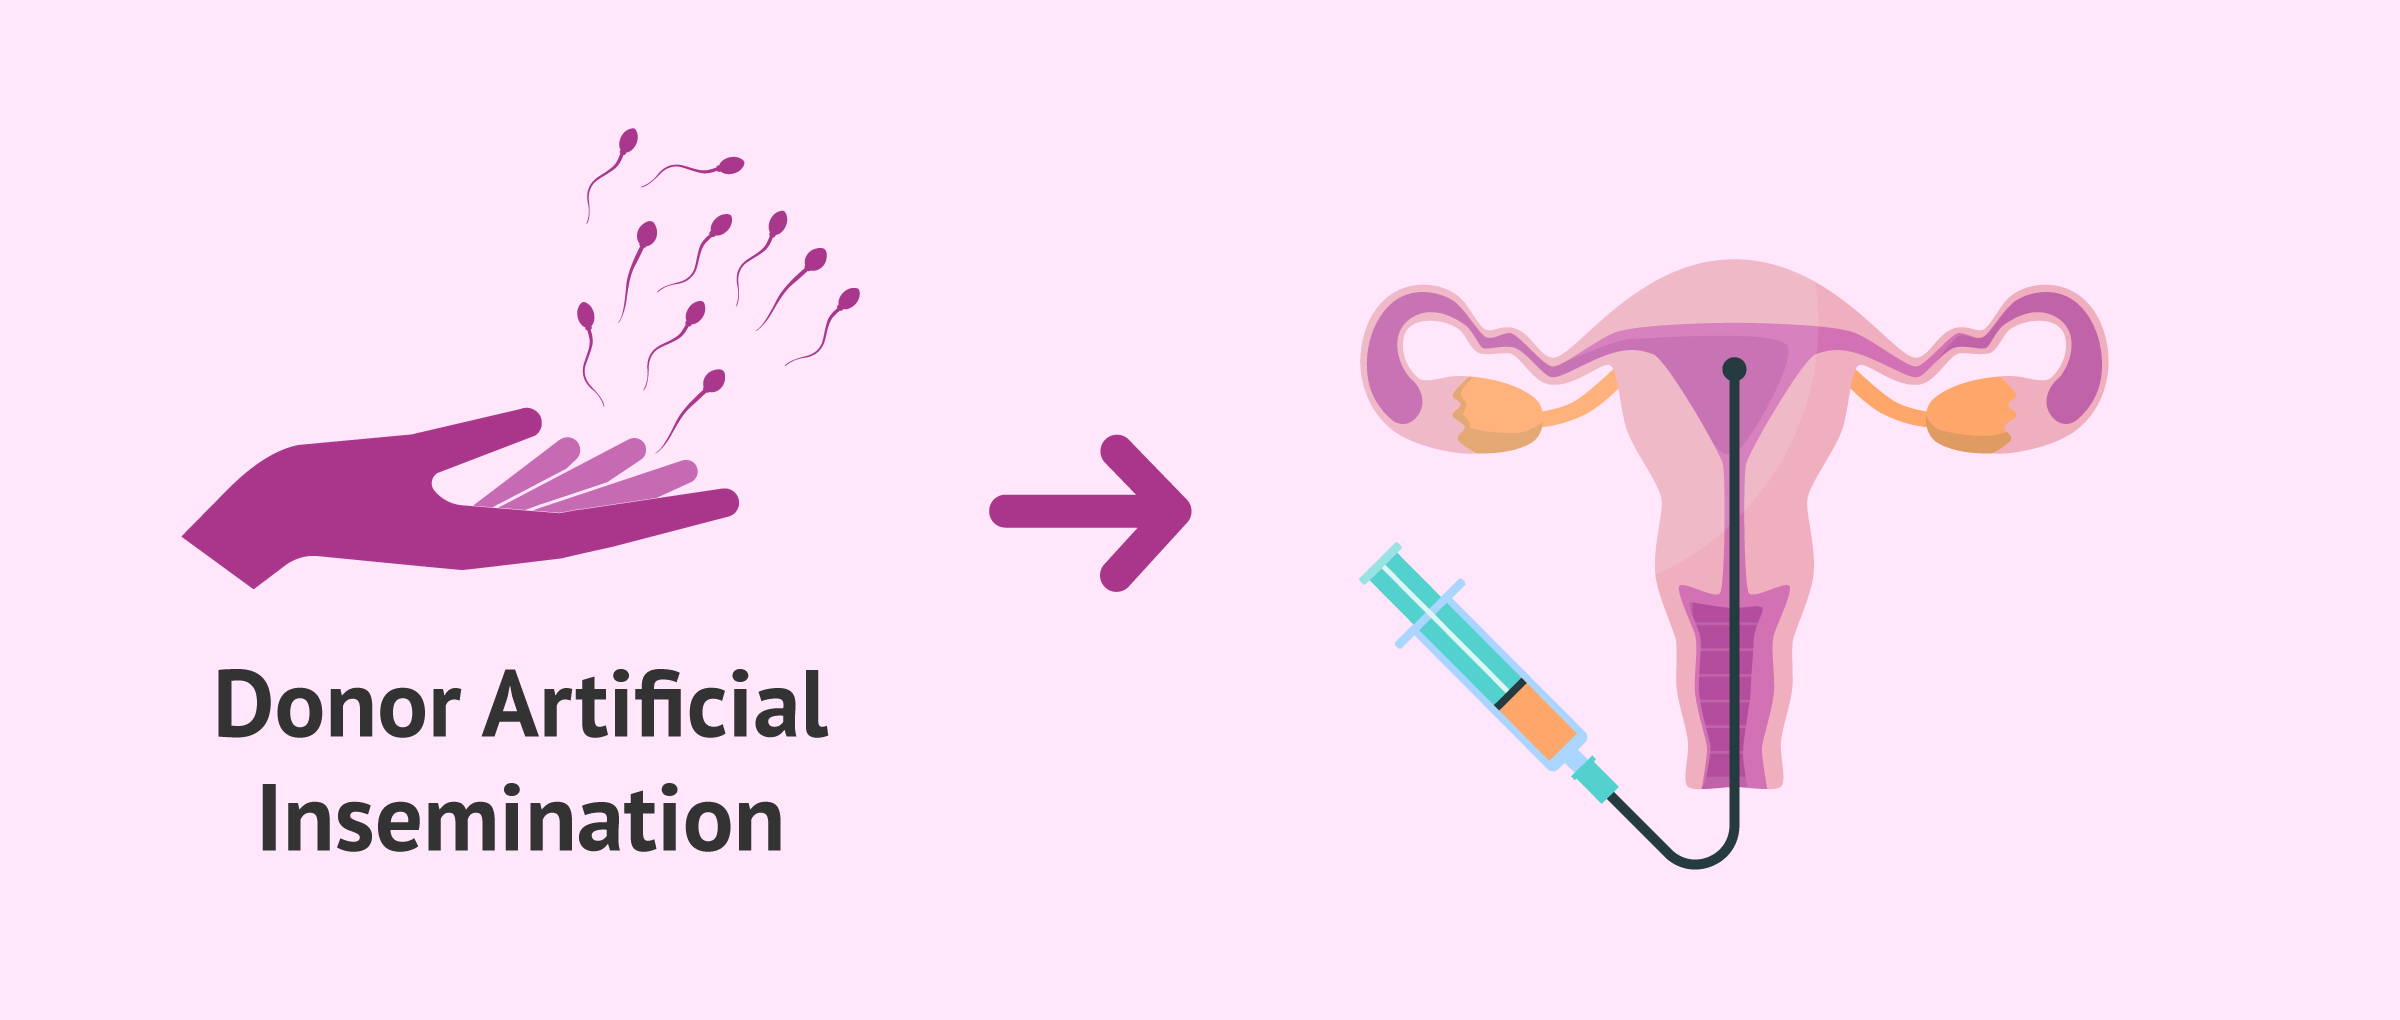 Artificial insemination with donor sperm